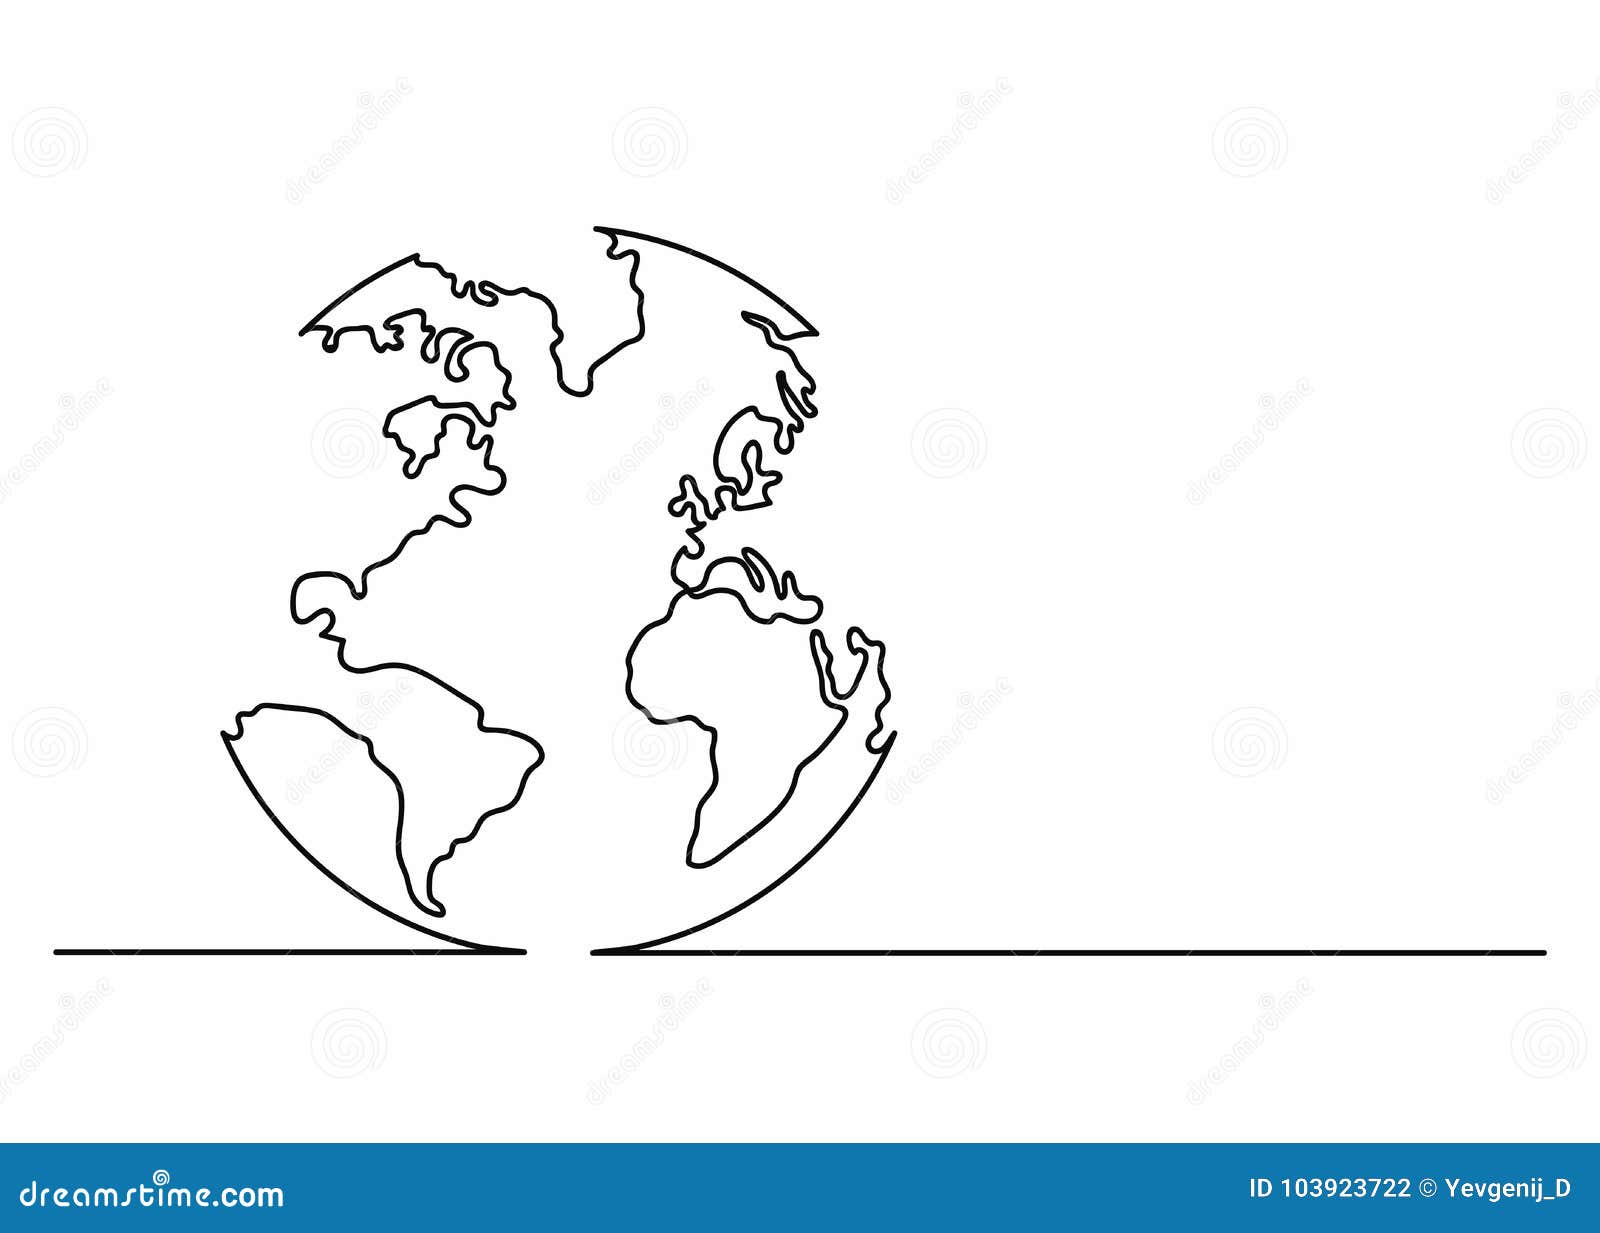 globe icon in line art style. planet earth icon. continuous line drawing. single, unbroken line drawing style